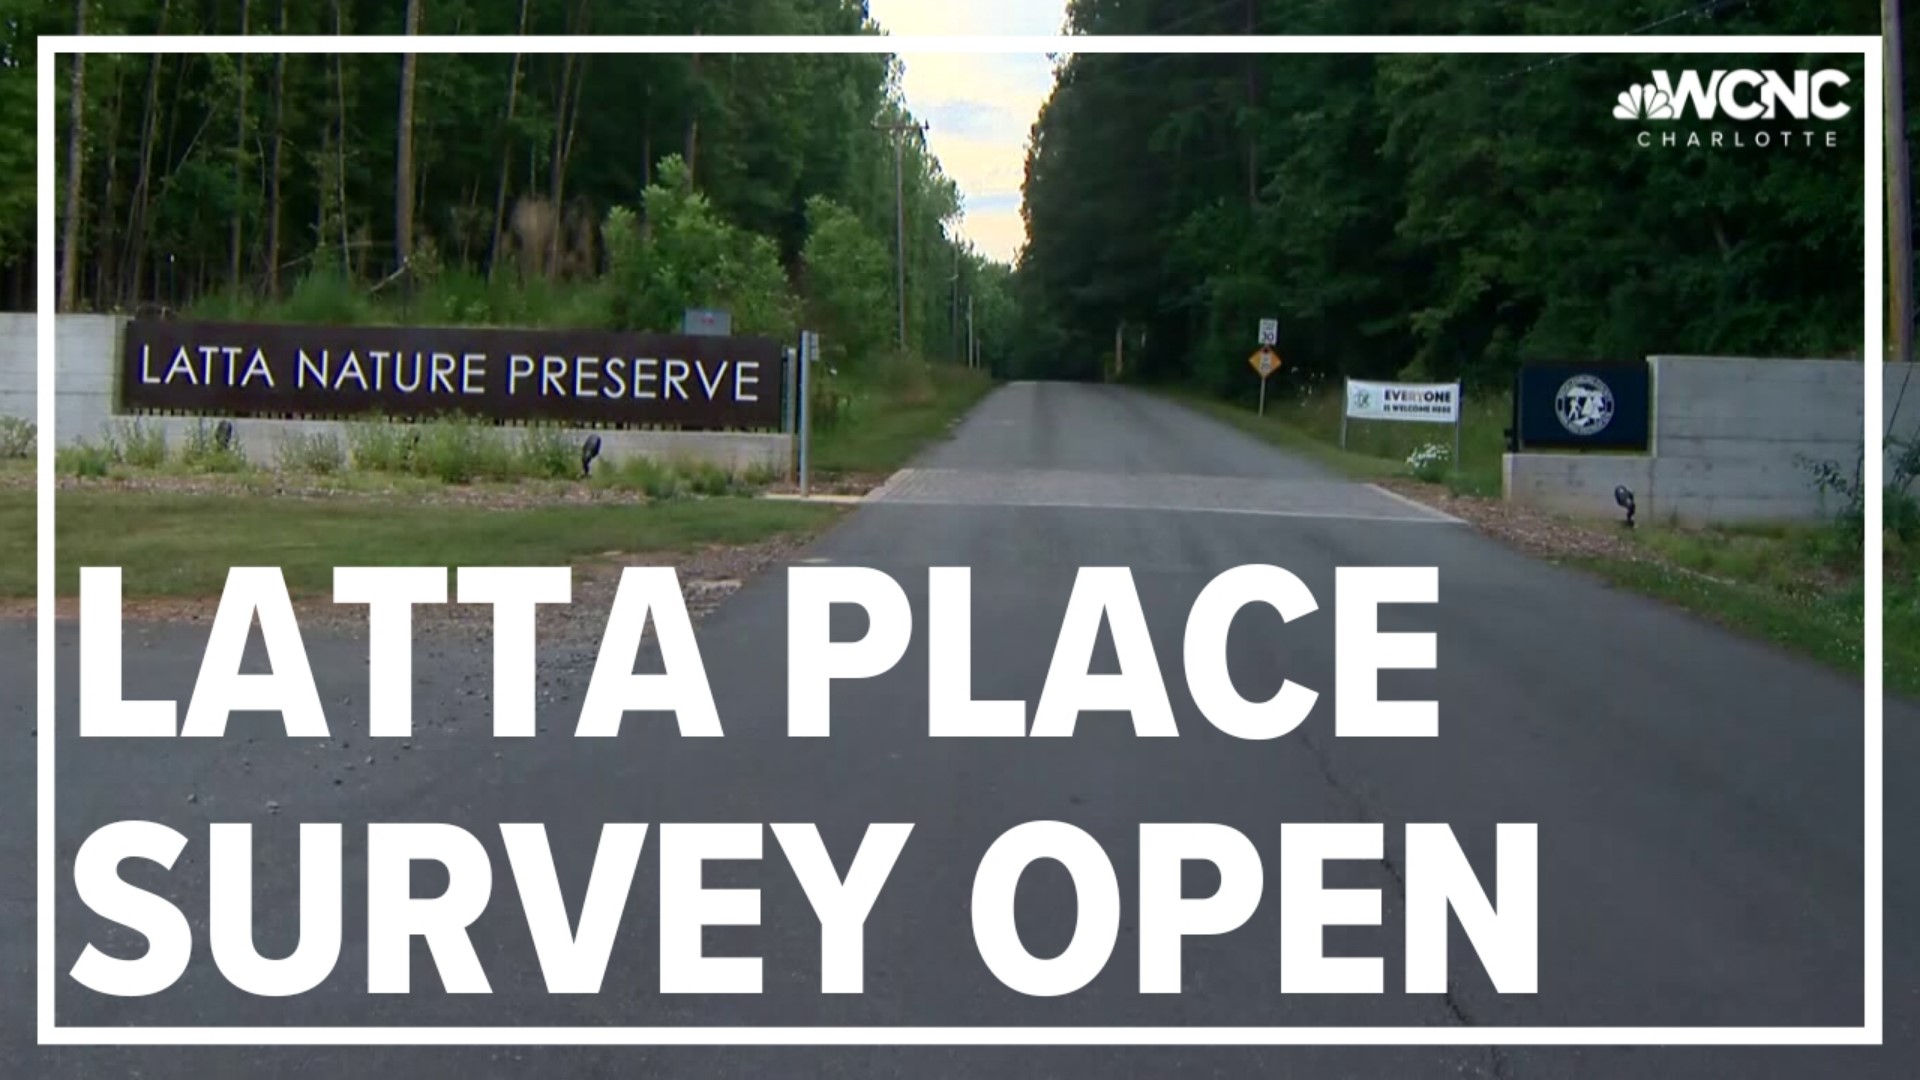 A controversial Juneteenth event led to the Latta Plantation being closed in 2021. Leaders are now seeking input on what to do with the location.